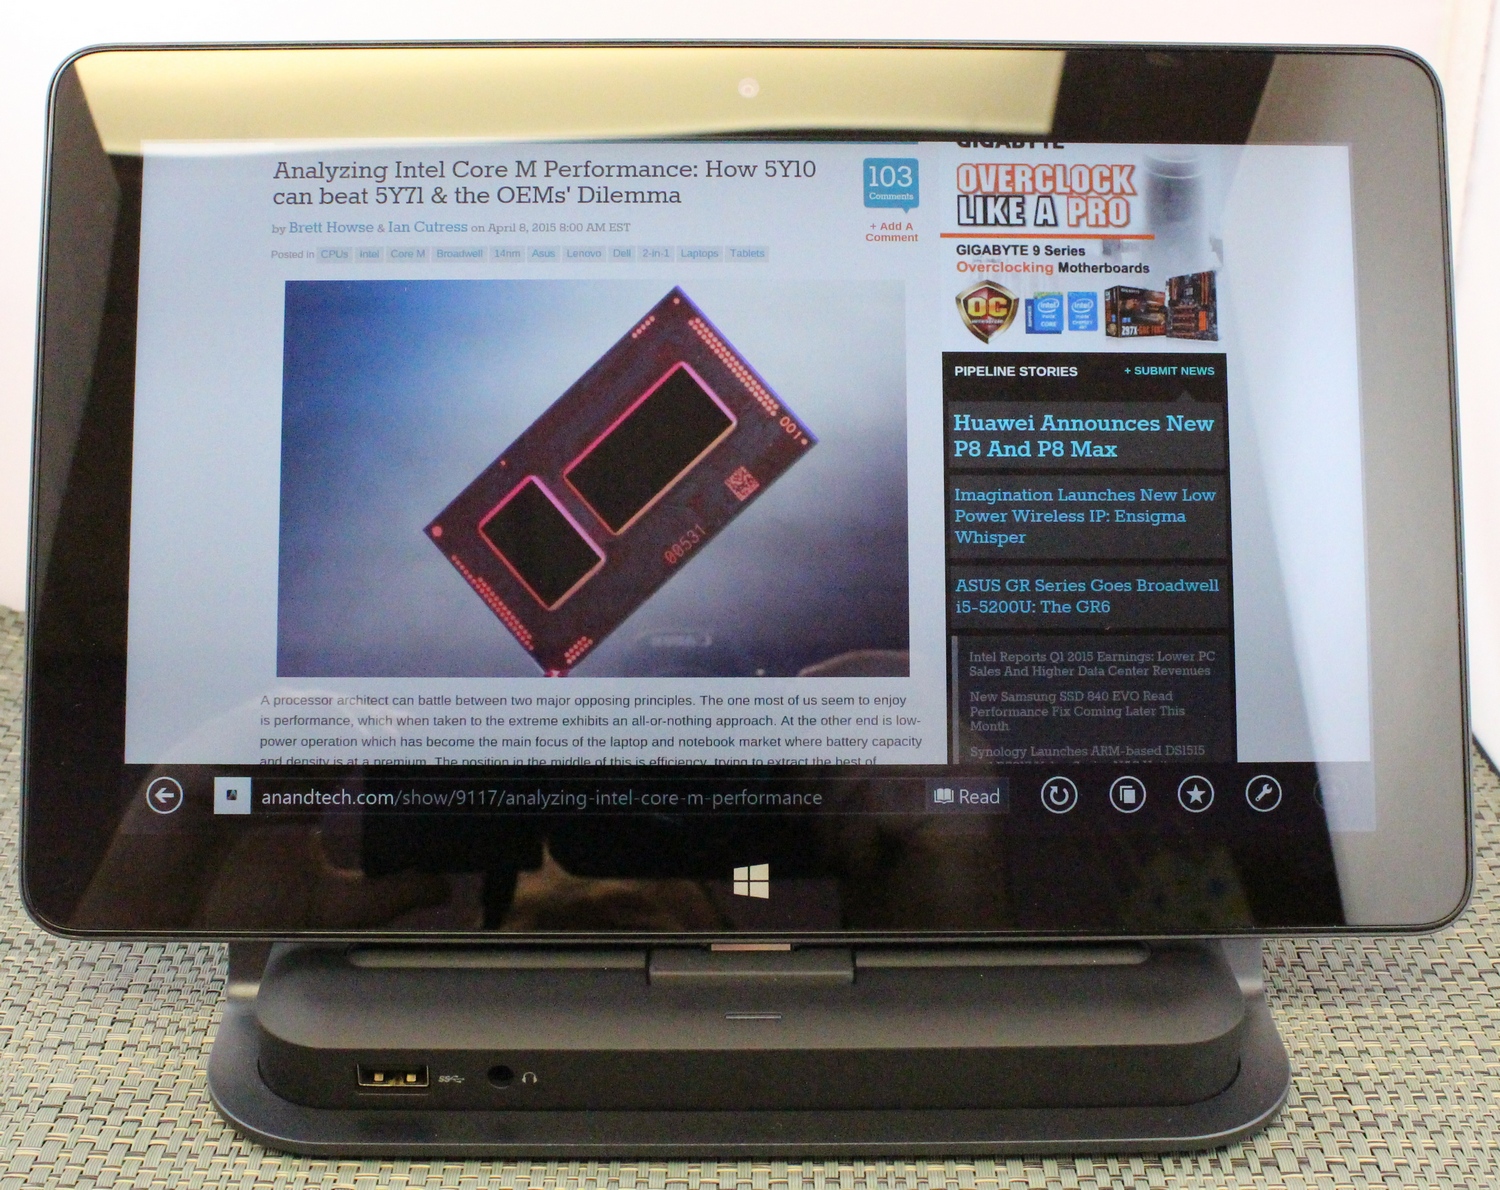 Final Words - The Dell Venue 11 7000 Review